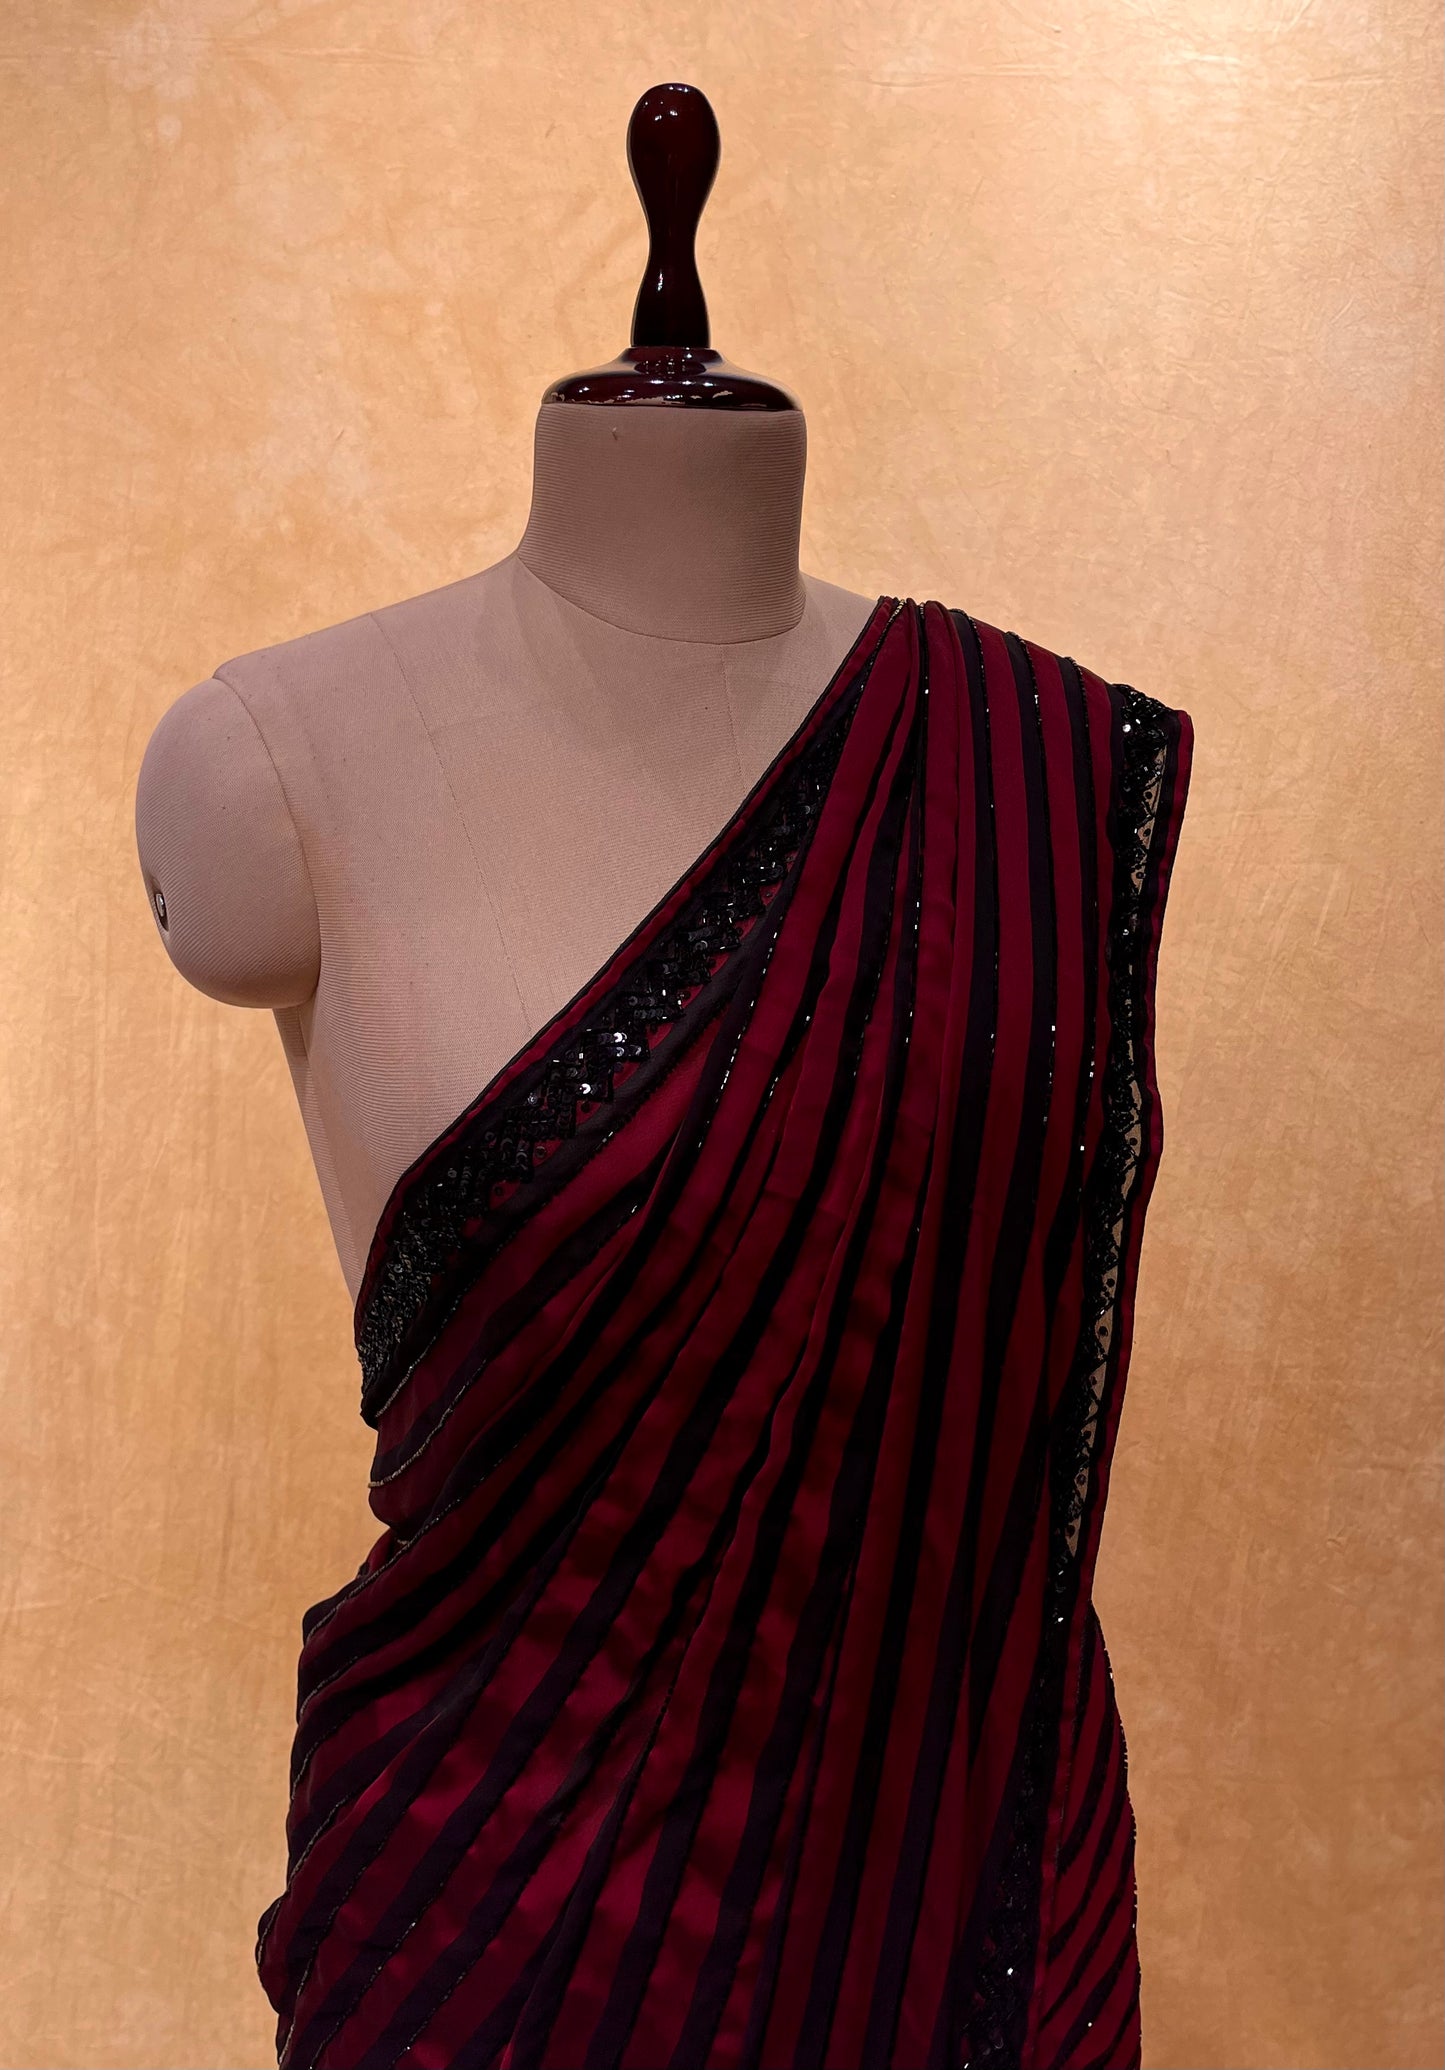 BLACK & MAROON COLOUR GEORGETTE SATIN STRIPED EMBROIDERED SAREE EMBELLISHED WITH CUTDANA WORK